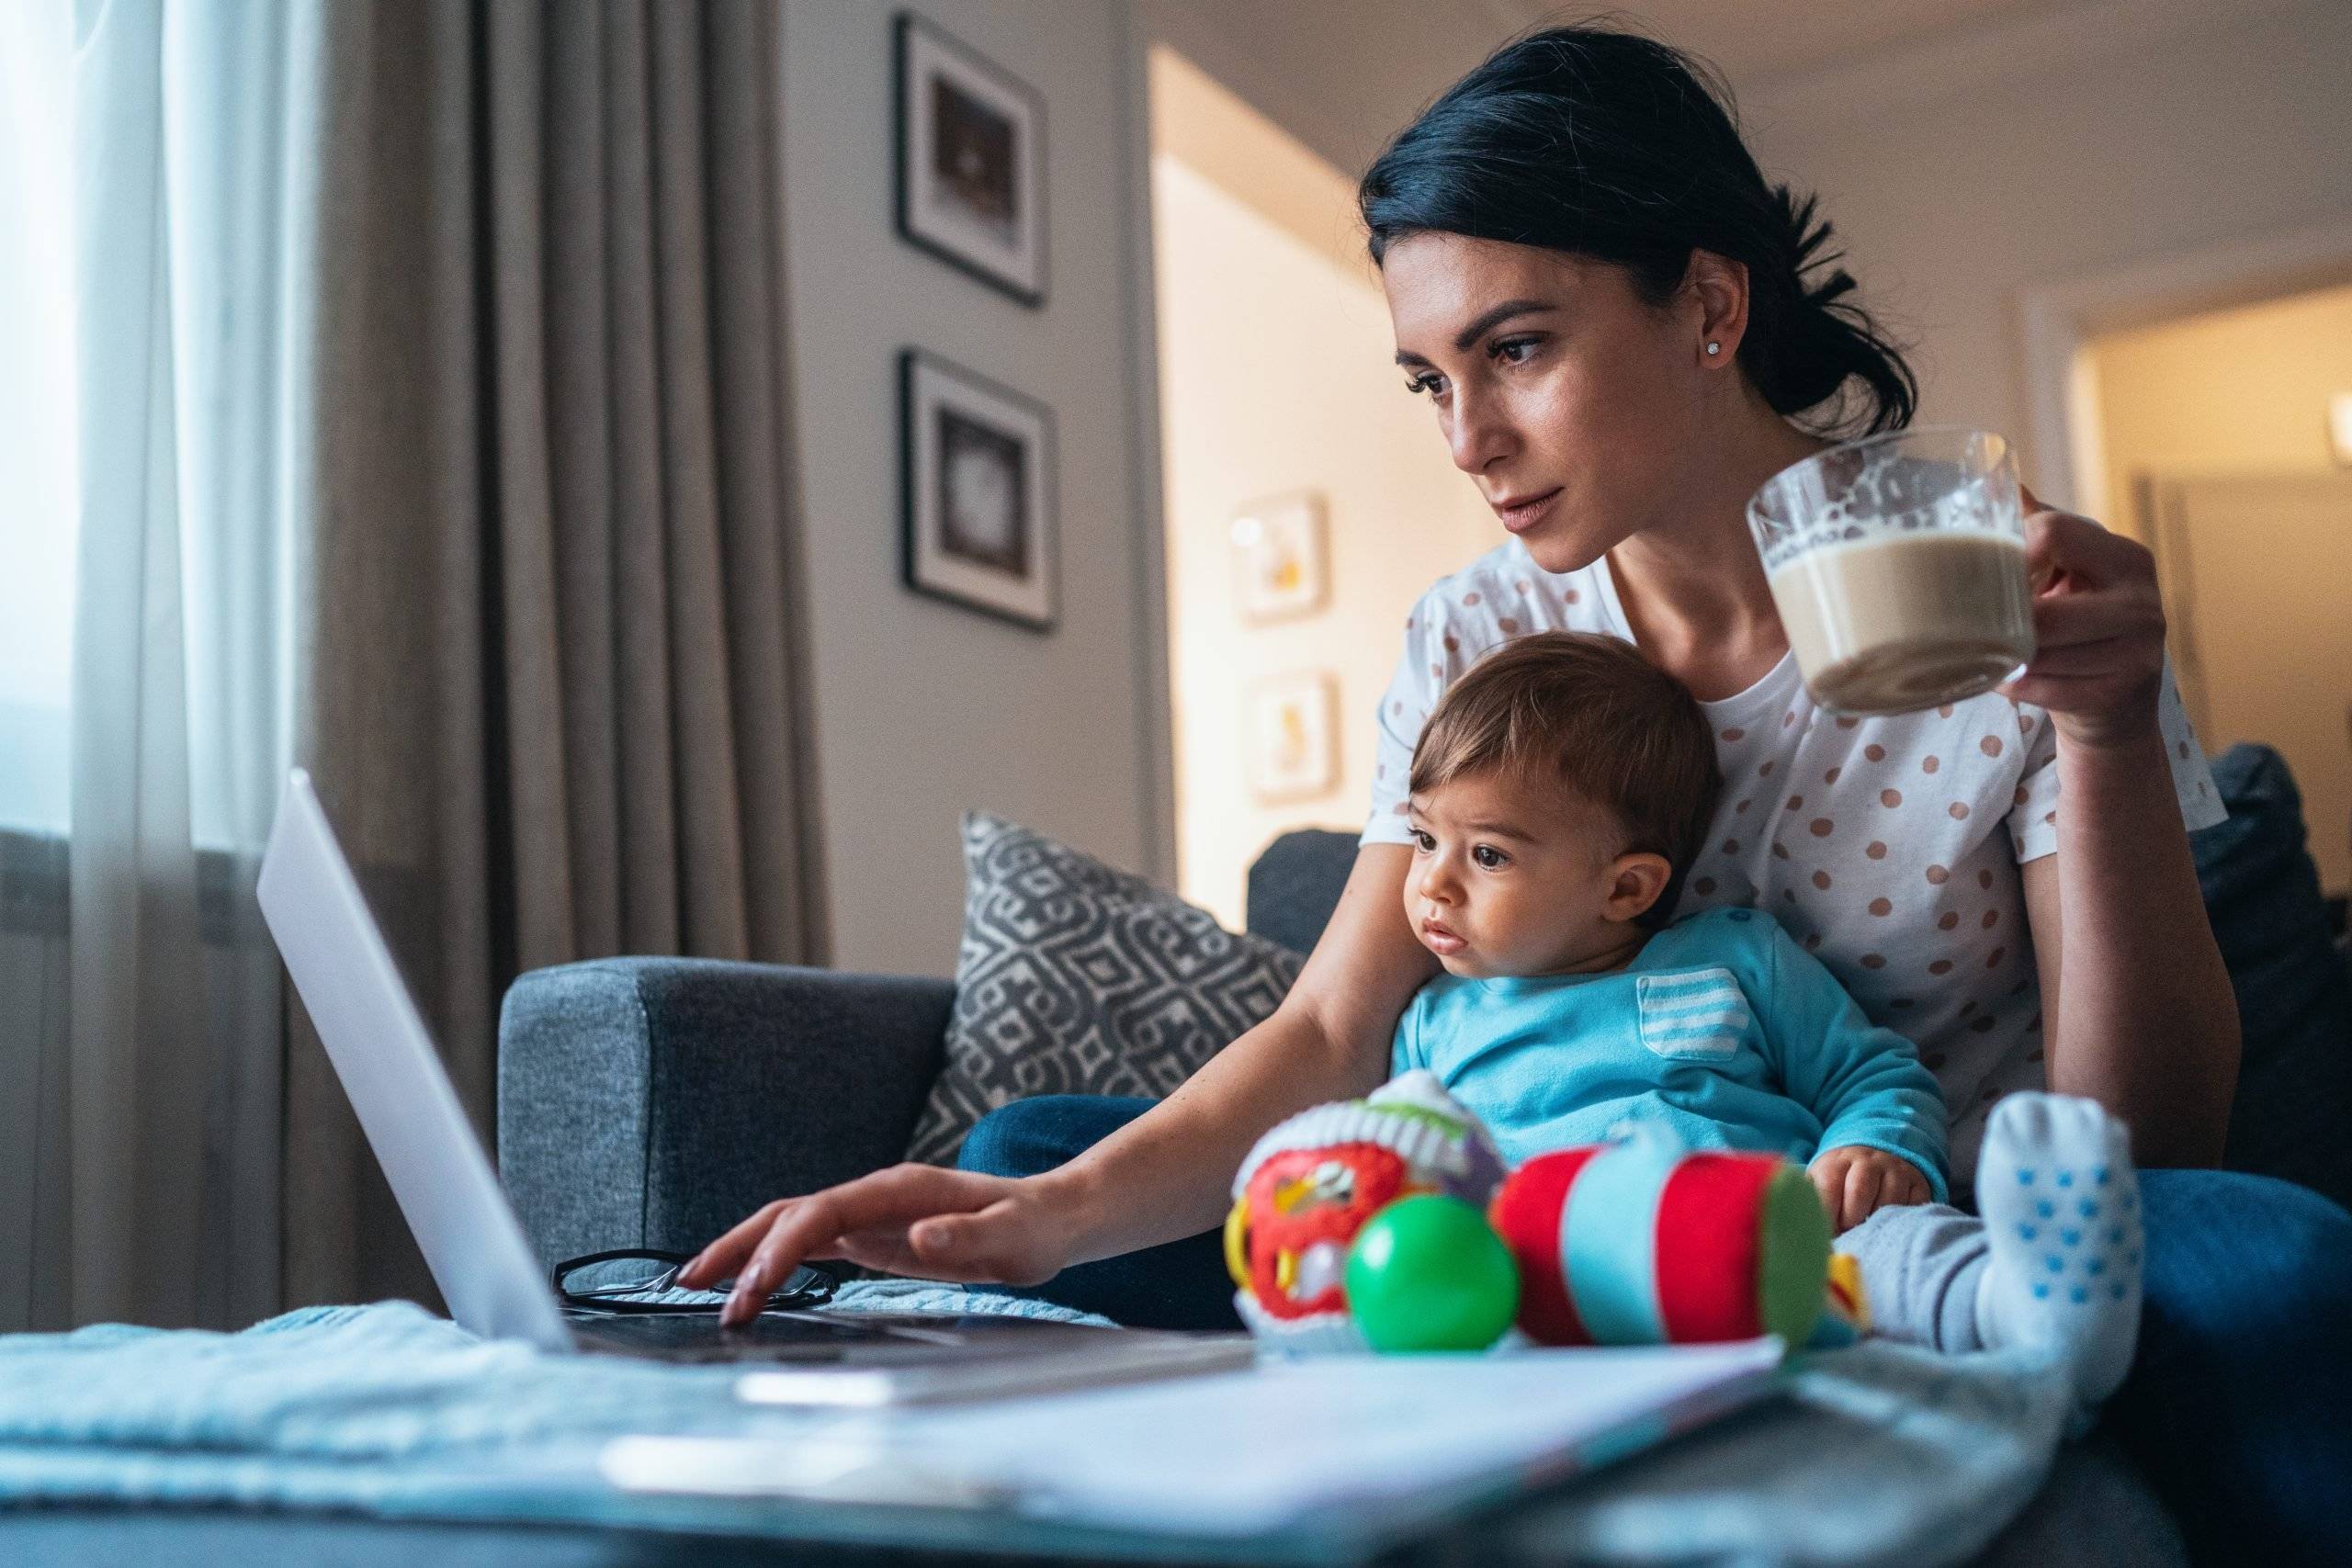 Young modern mother with a baby using laptop at home. Looking to attend college as a parent.